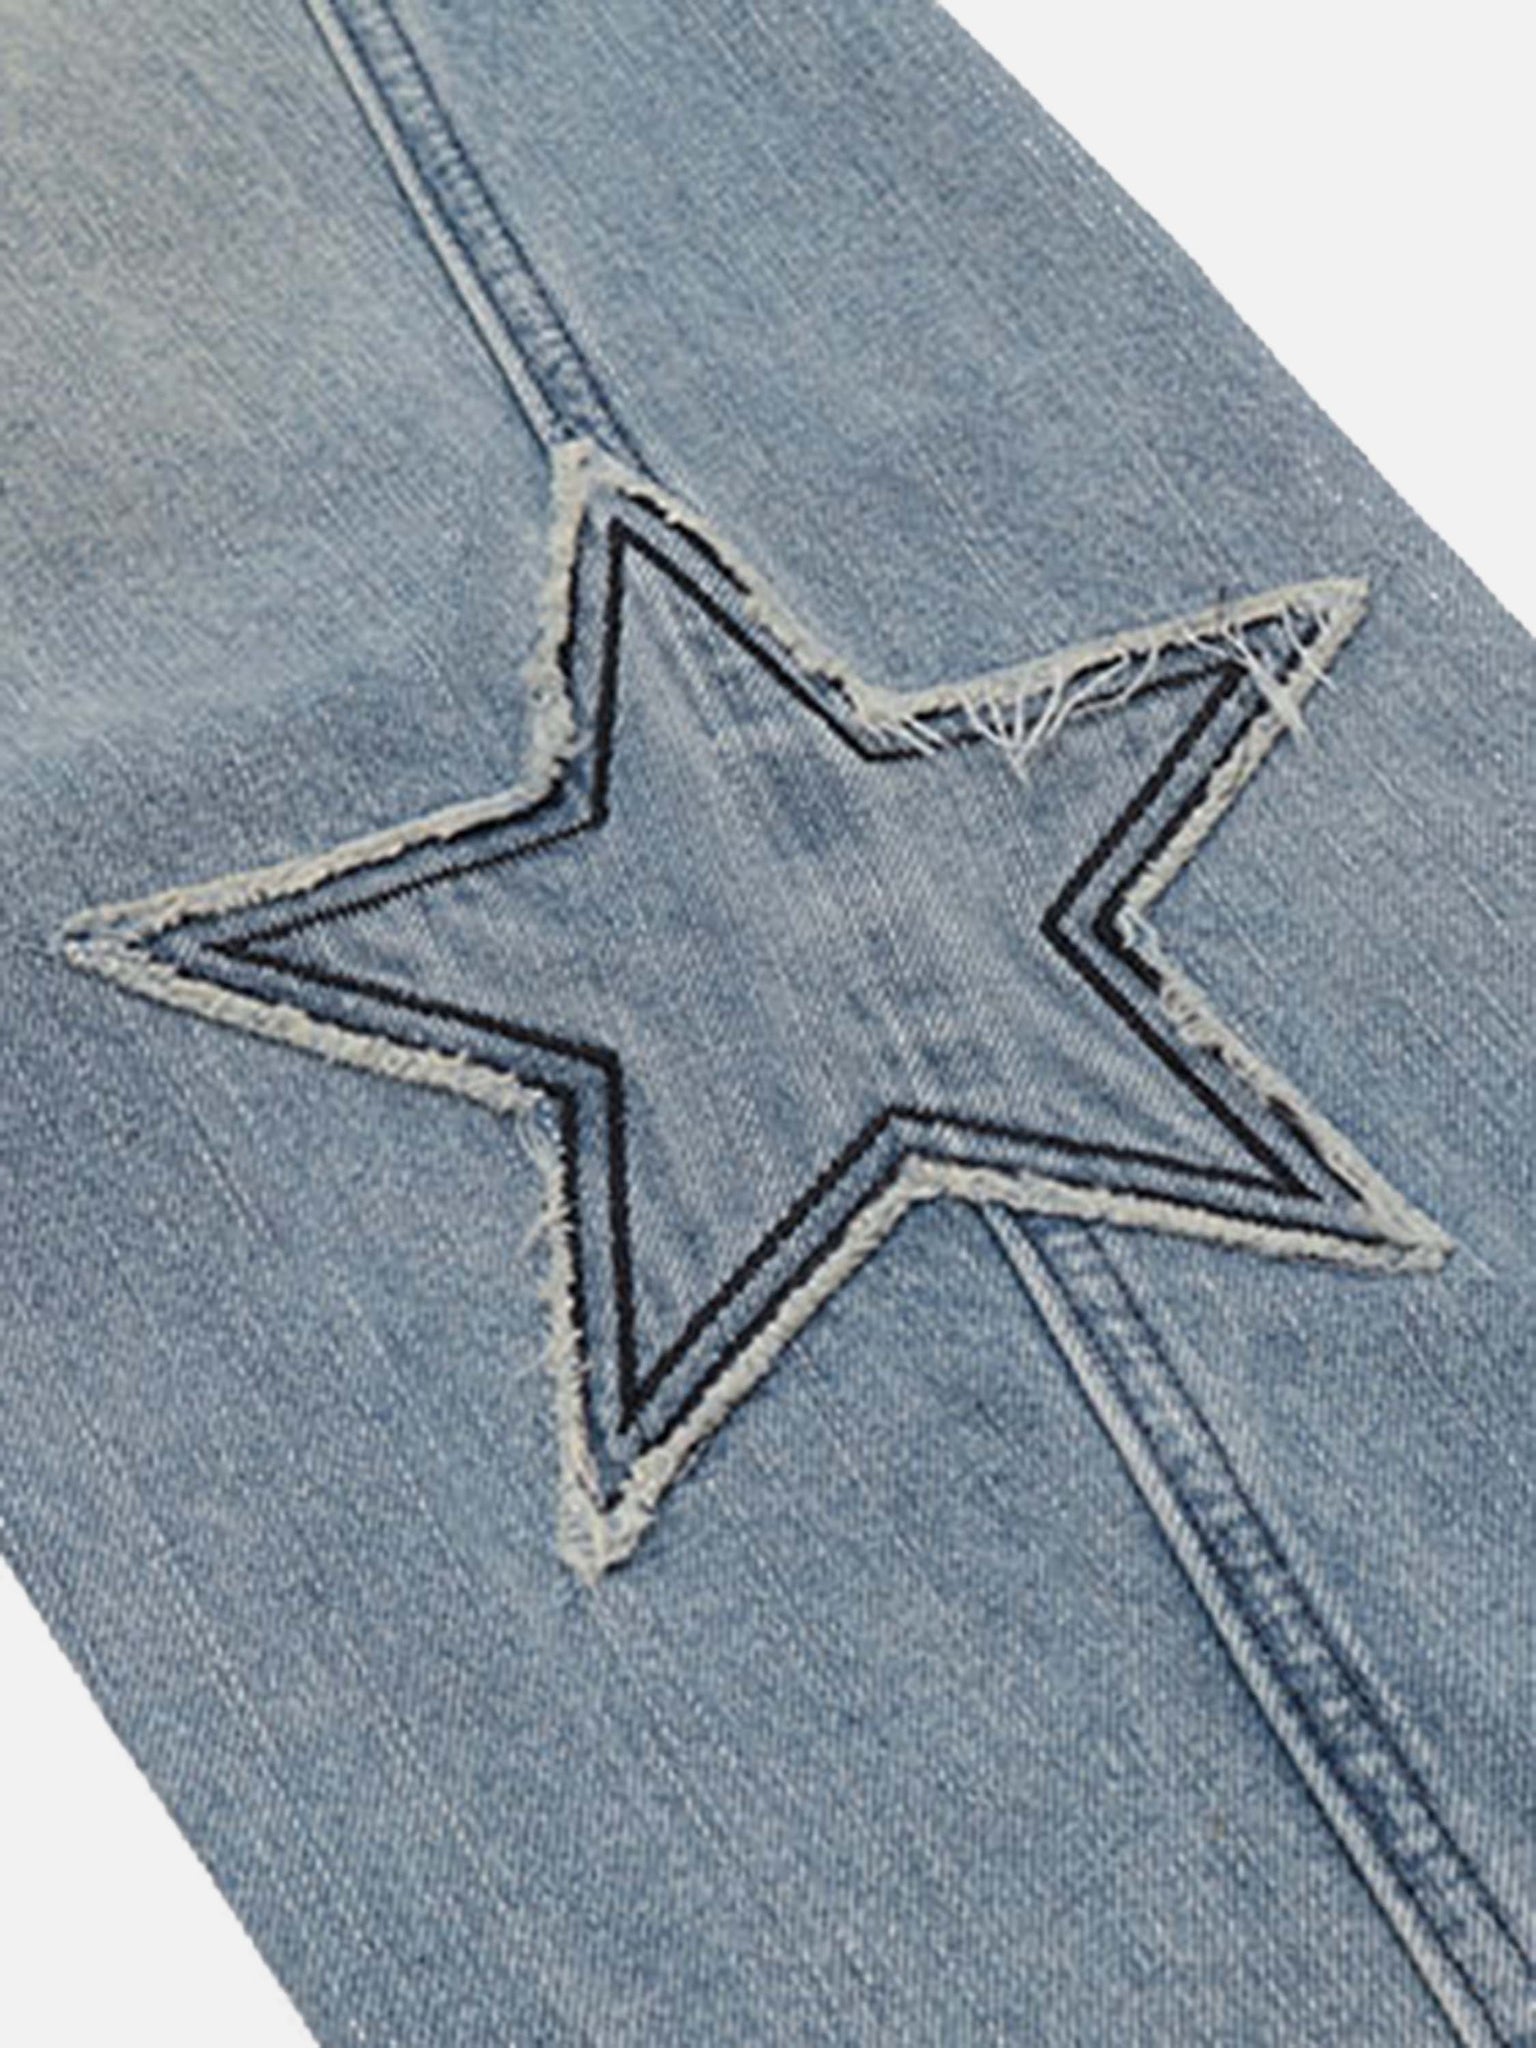 Thesupermade American Vintage Star Patch Embroidered Jeans